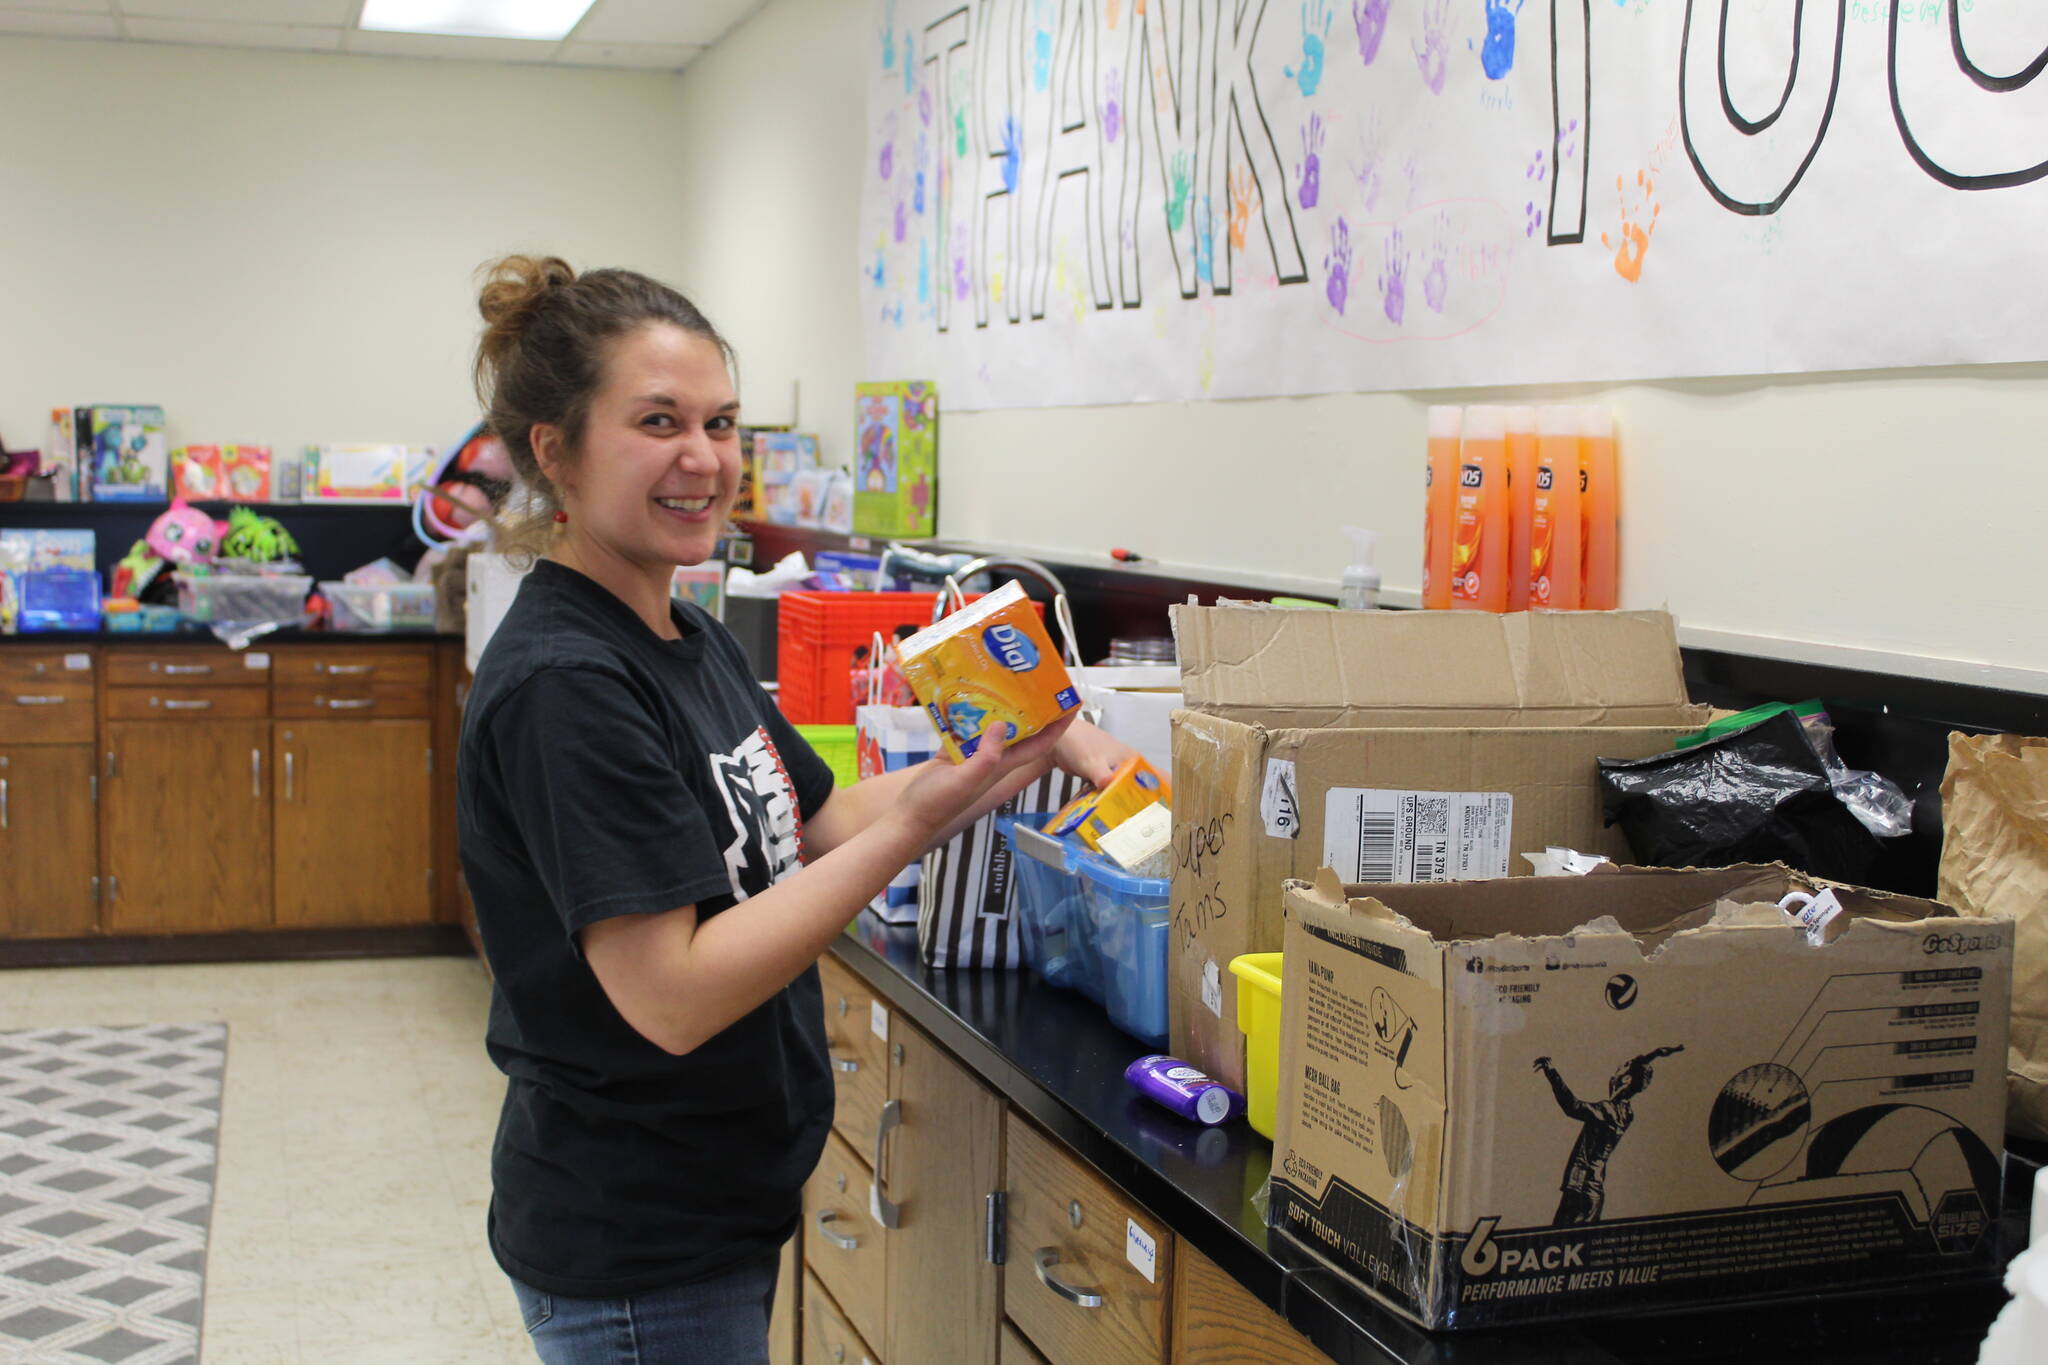 Photo by Karina Andrew/Whidbey News-Times
Arianna Bumgarner stocks soap and other hygiene products in Coupeville School District’s McKinney-Vento center.